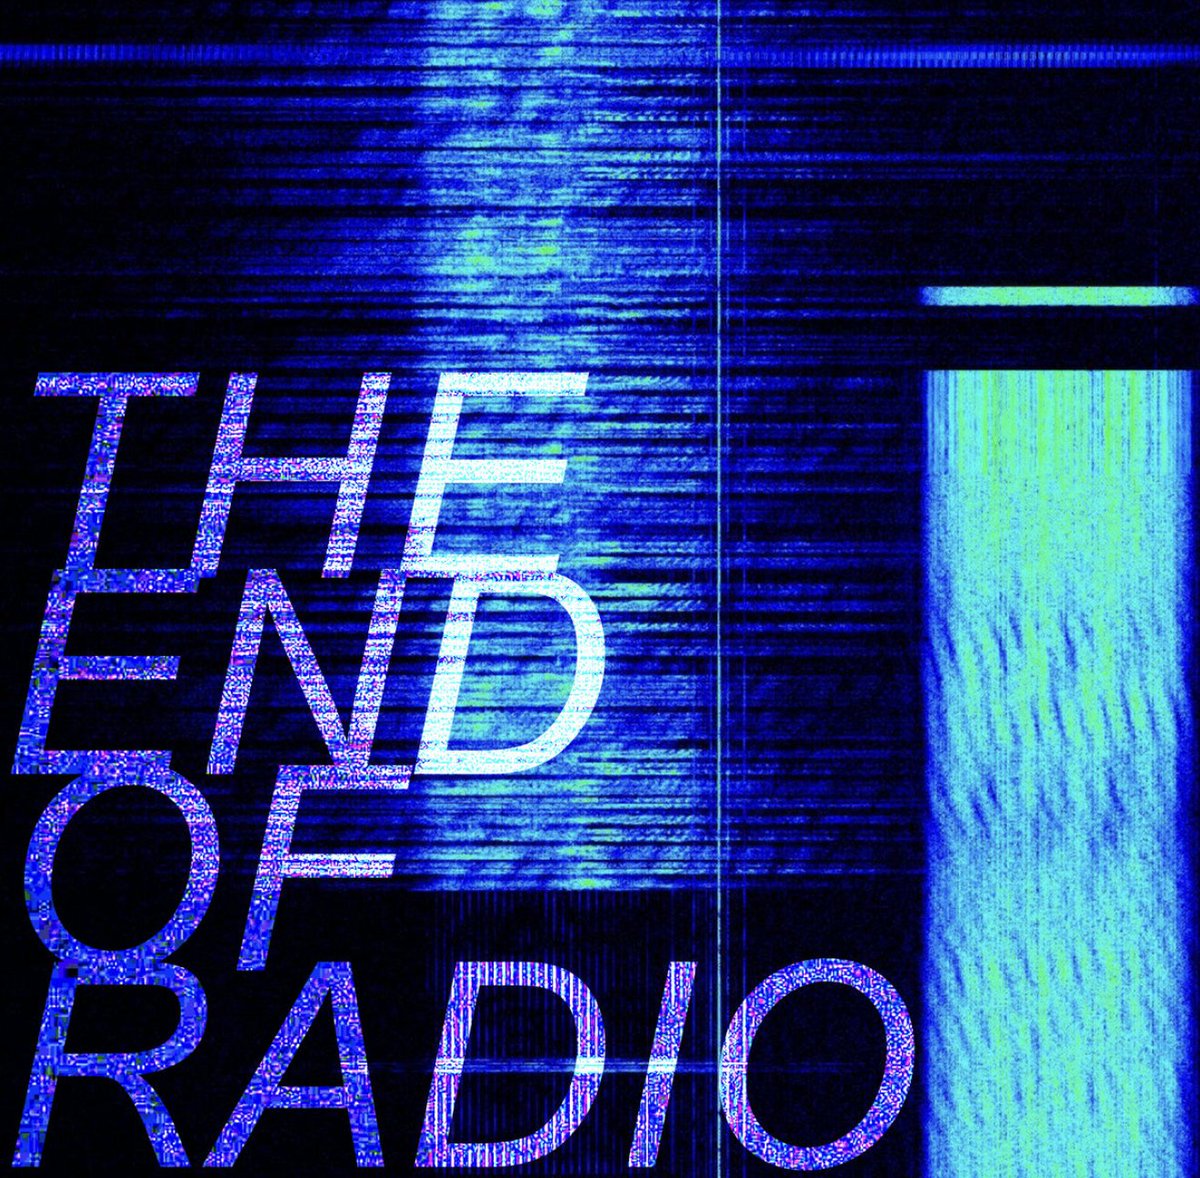 This is superb and a fitting tribute to the late Steve Albini... 'The End Of Radio' - James Adrian Brown ft @Benefitstheband Available via @CastlesInSpace All proceeds to Steve's wife's charity 'Letters To Santa' jamesadrianbrown.bandcamp.com/track/the-end-…